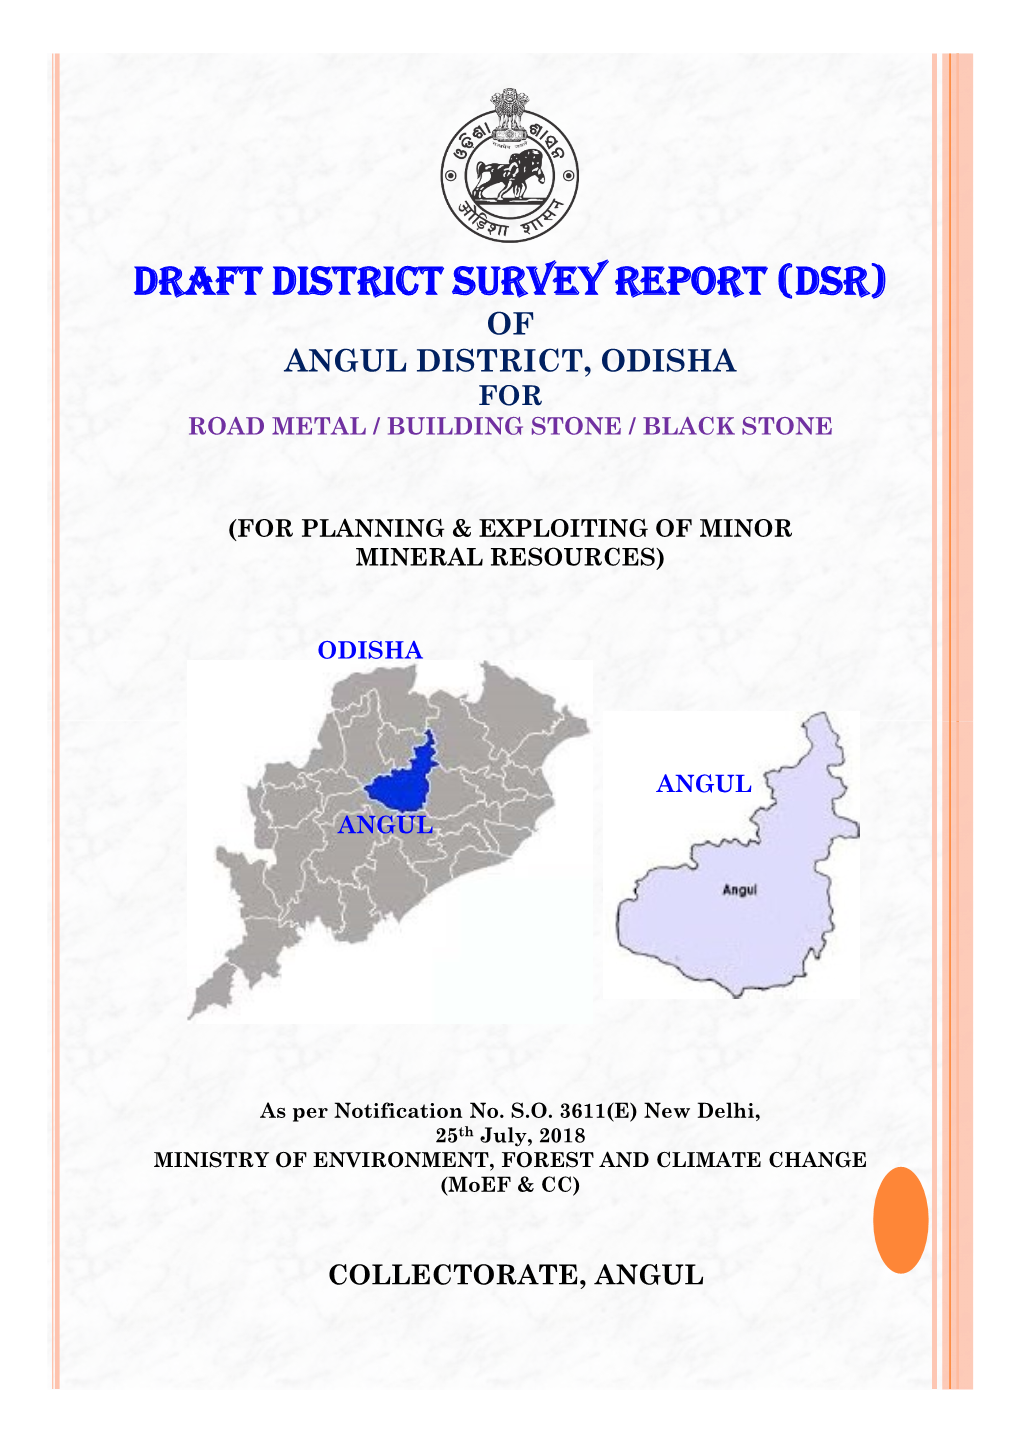 Draft District Survey Report (Dsr) of Angul District, Odisha for Road Metal / Building Stone / Black Stone